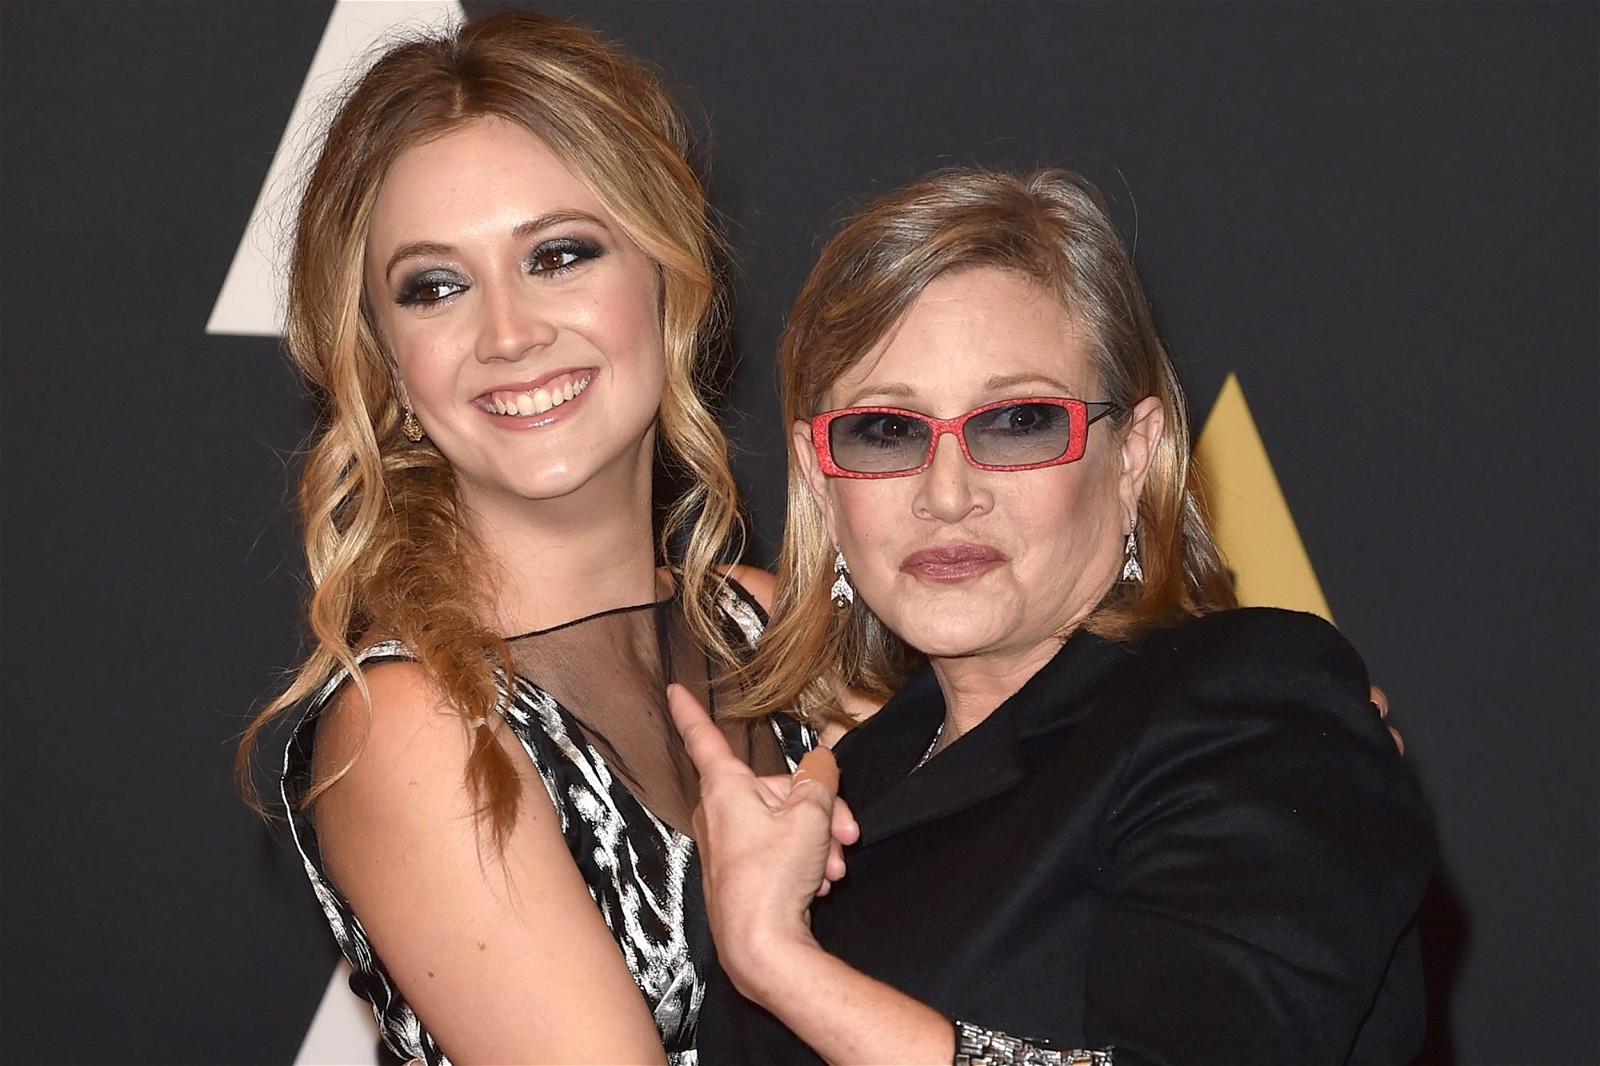 Billie Lourd and her mother Carrie Fishers